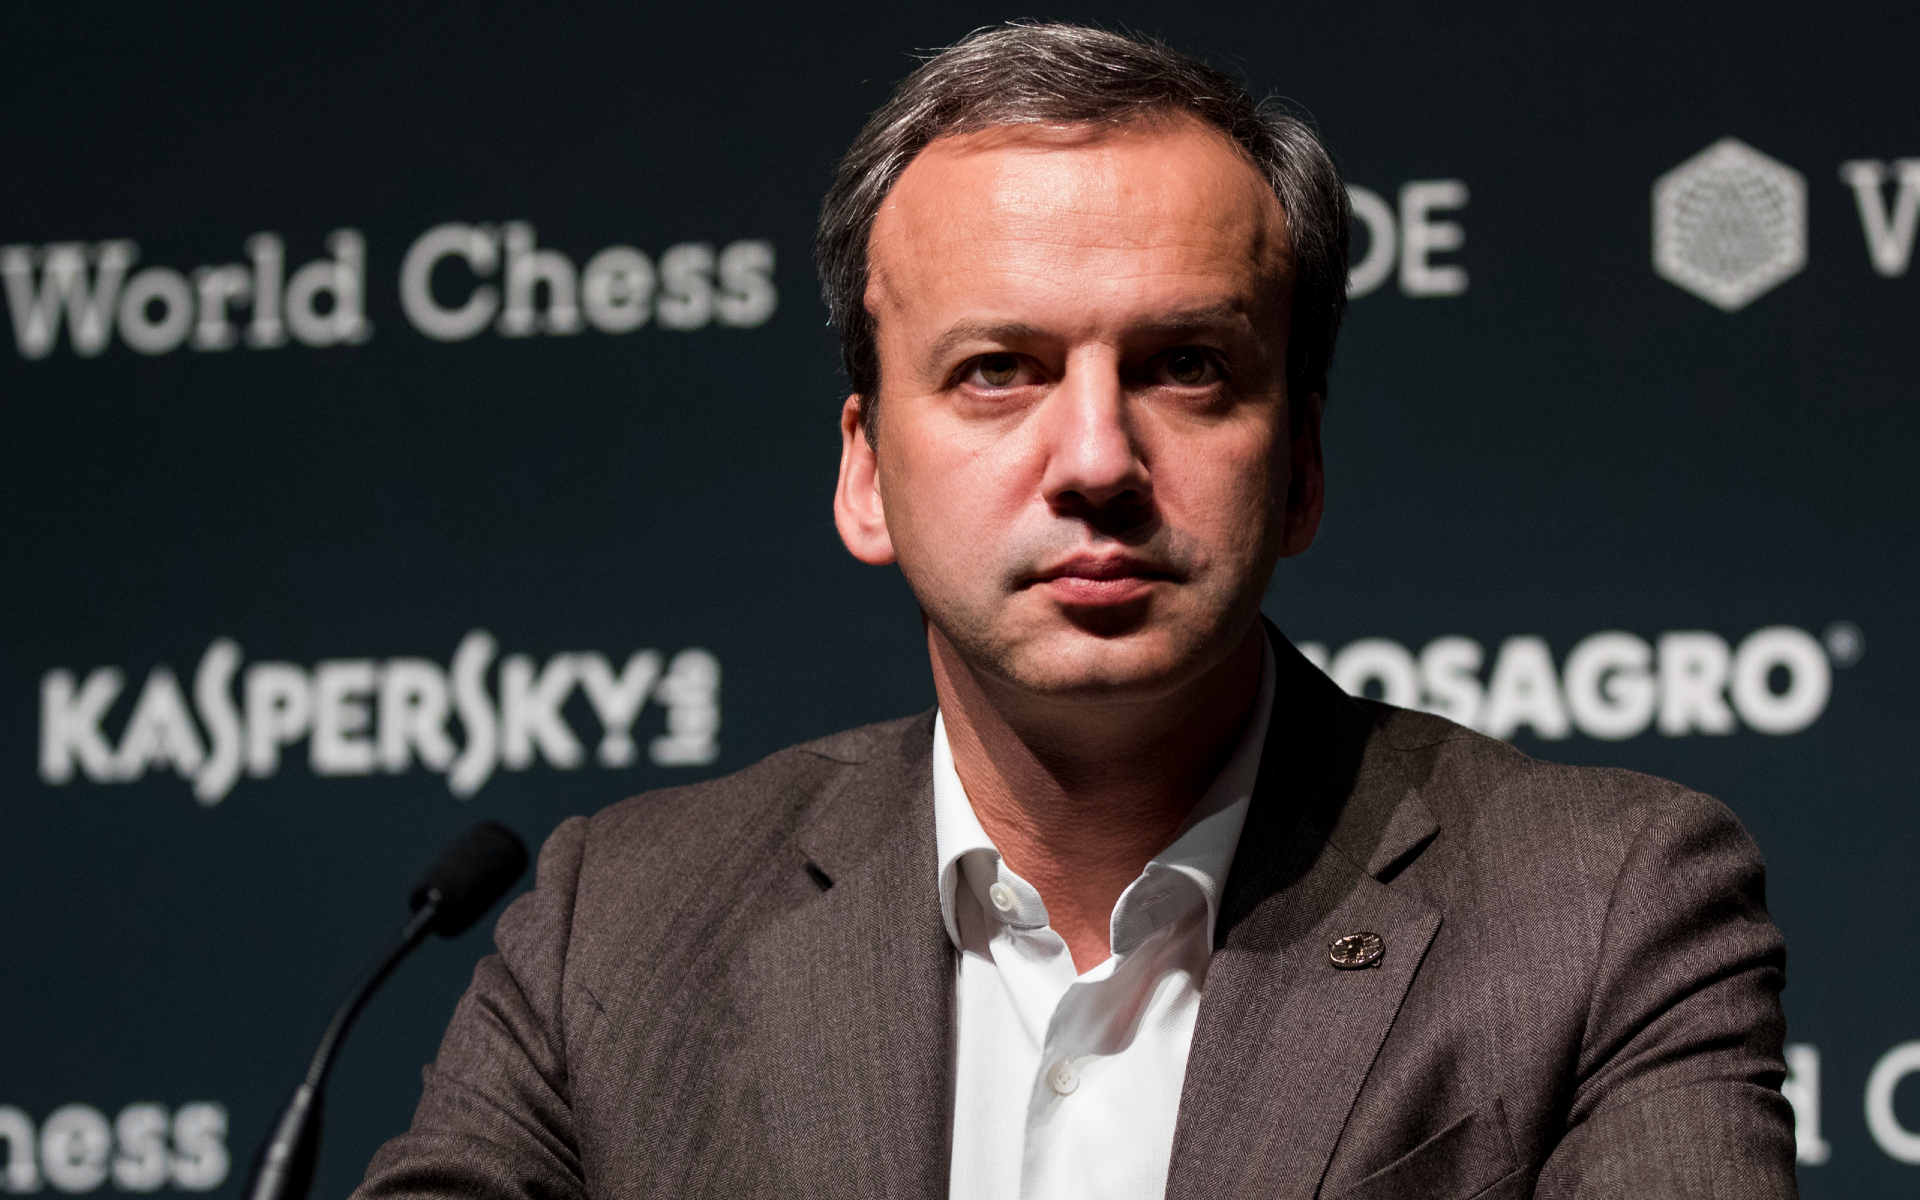 Фото:Tristan Fewings/Getty Images for World Chess